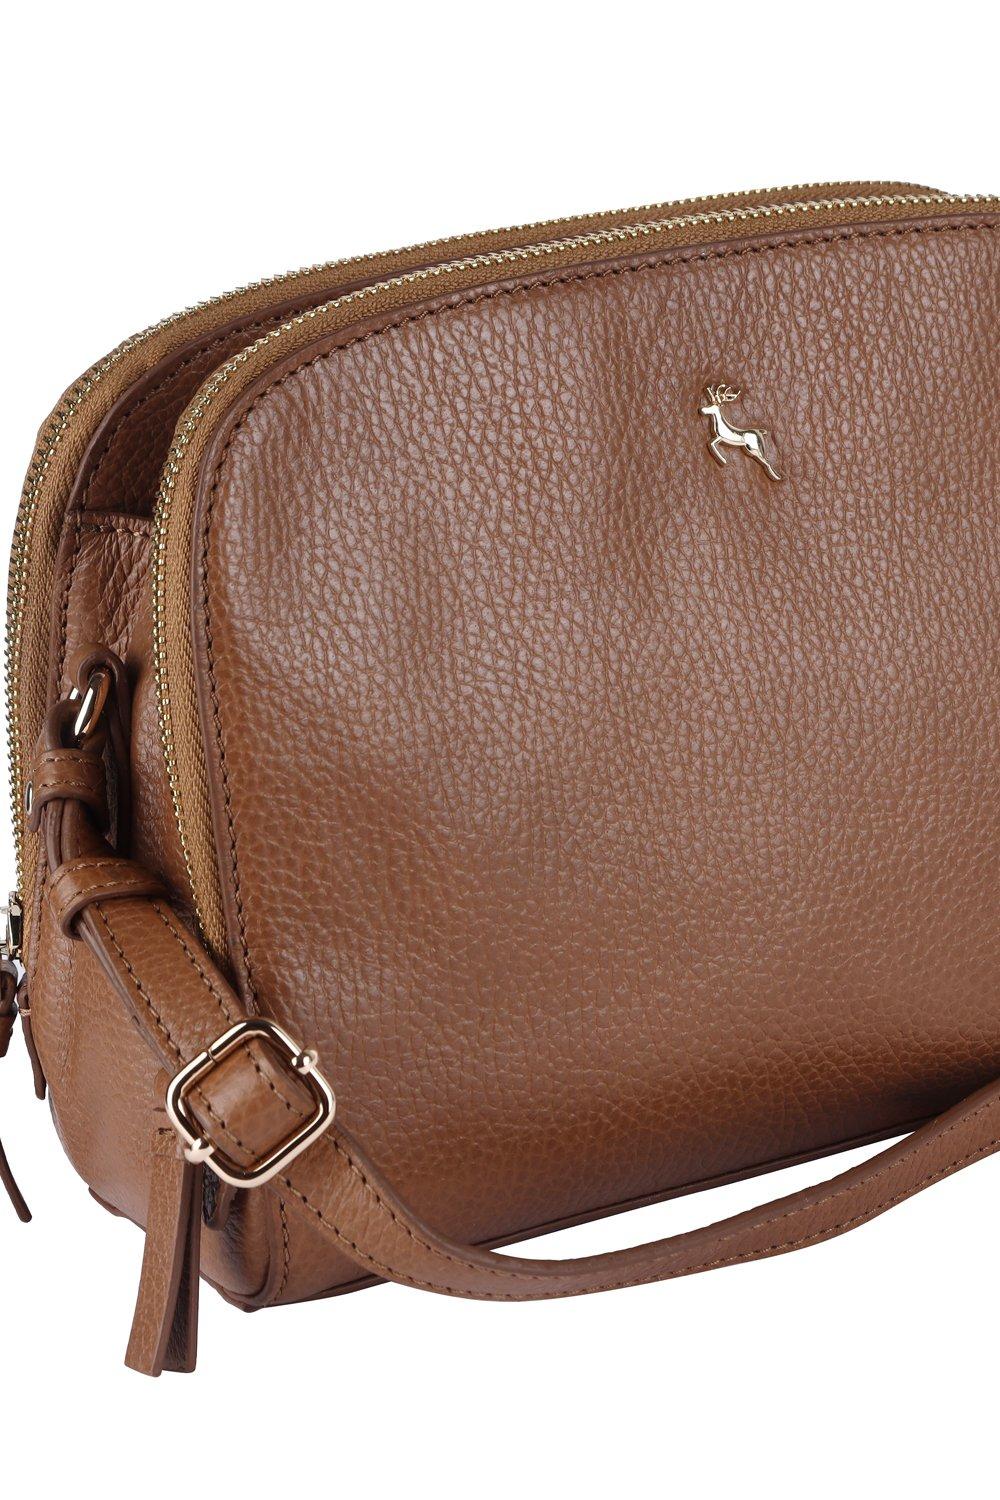 Ashwood Leather 'Classy' Leather Three Section Cross Body Bag